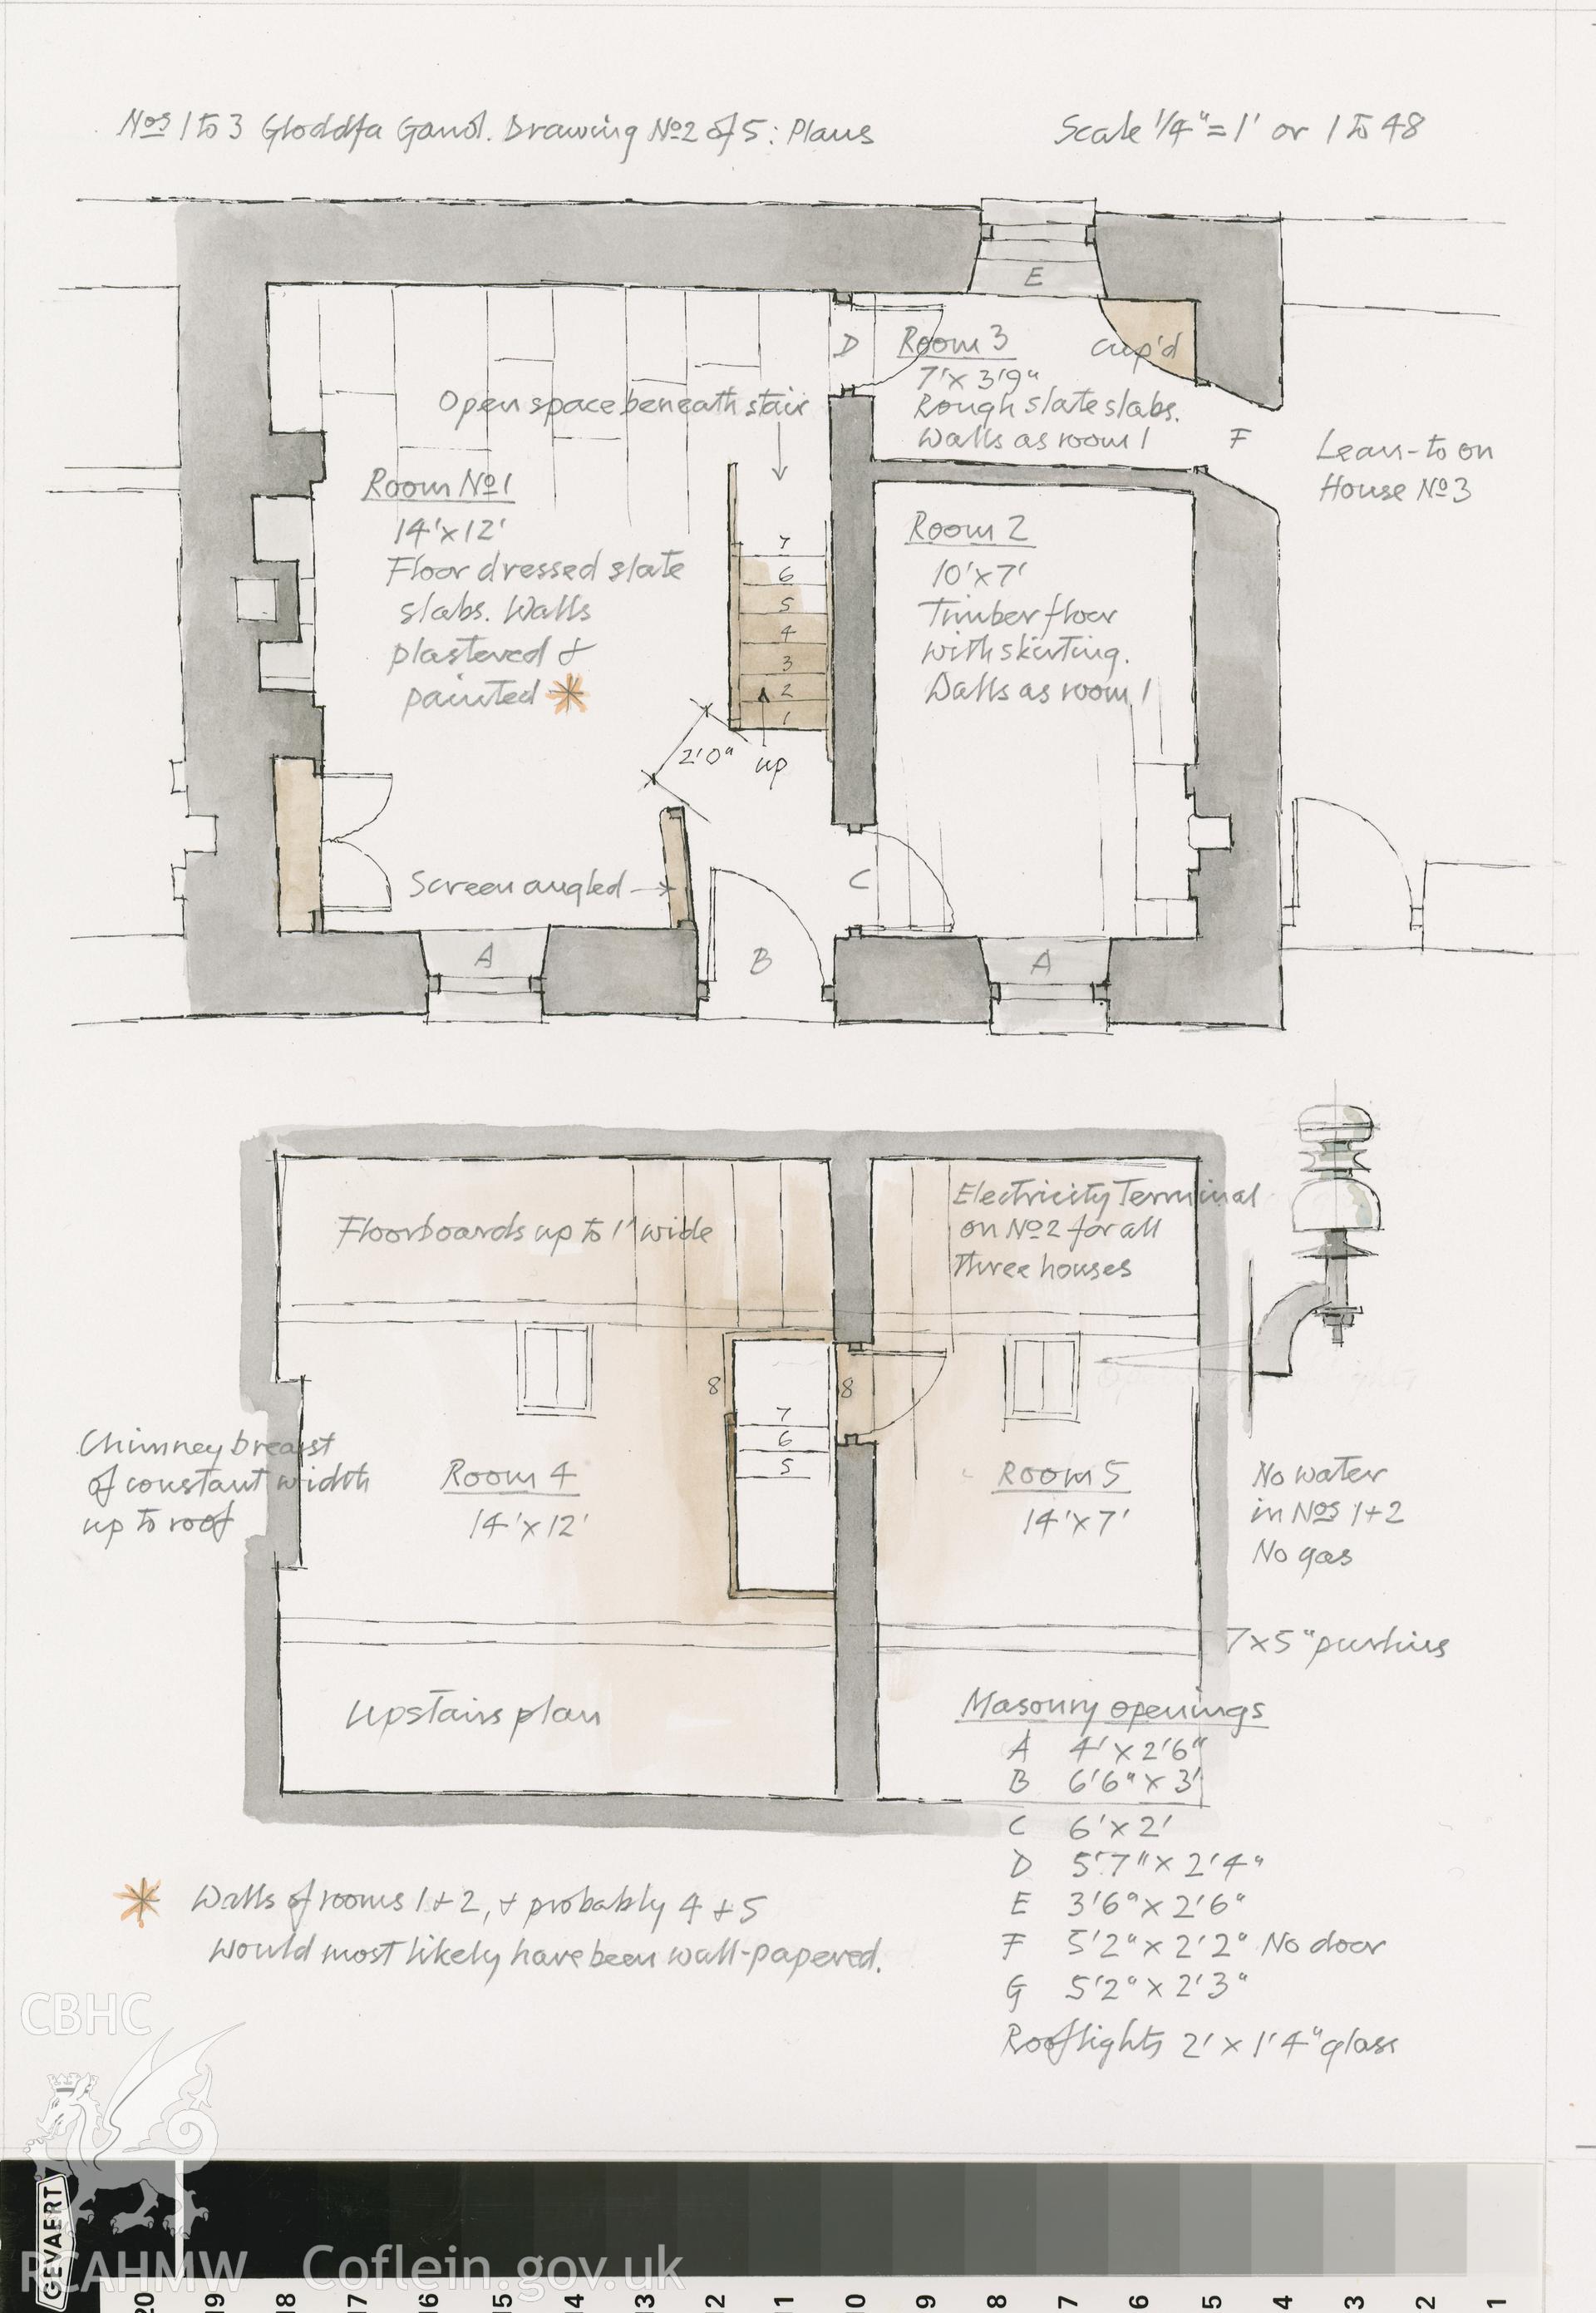 Gloddfa Ganol Cottages - Plan of No. 2: (pencil, ink and watercolour) drawing.